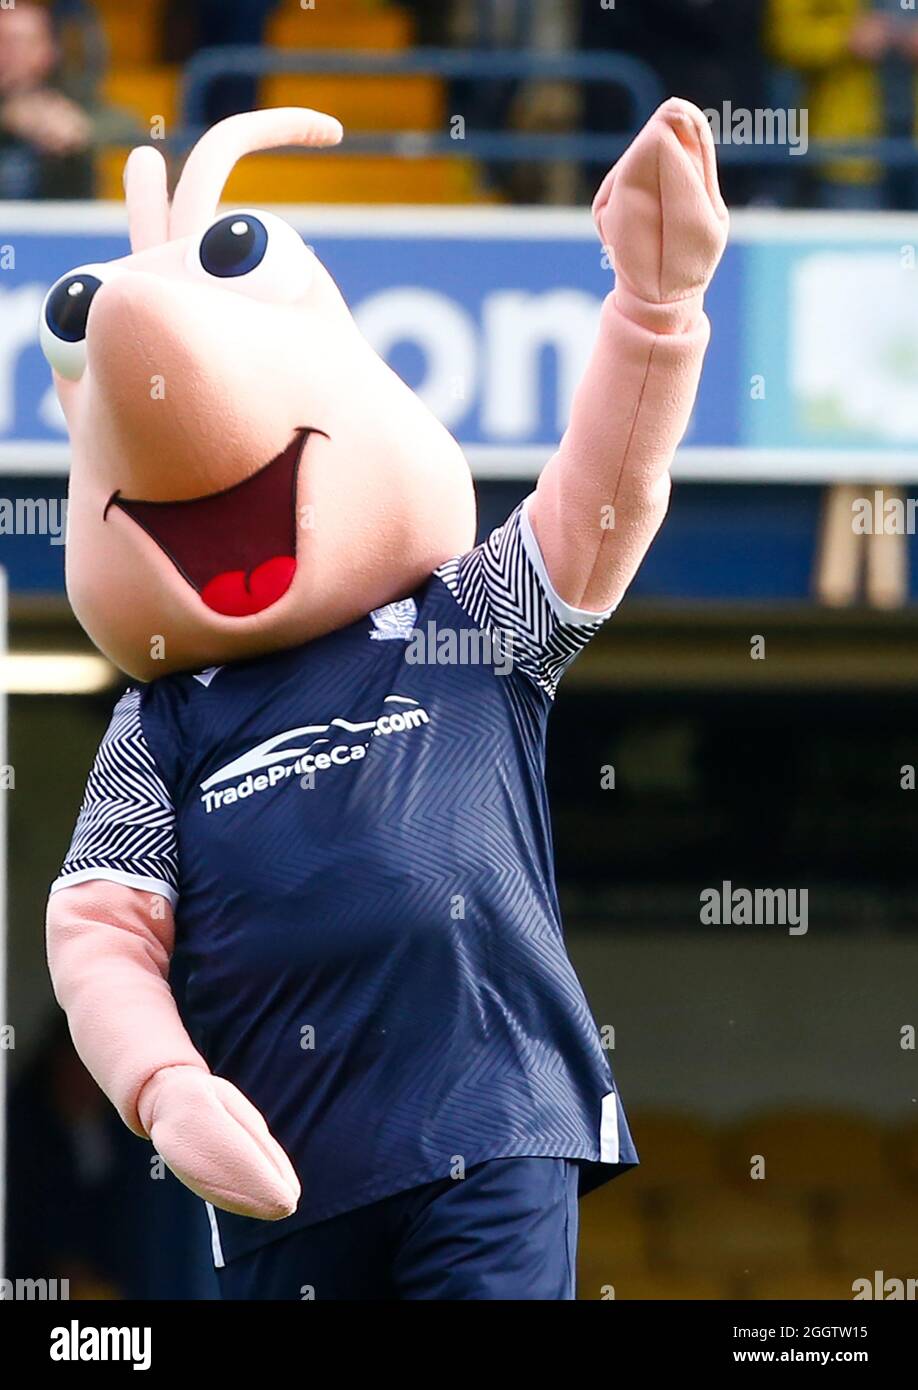 Southend United FC Exiles - Altrincham have a Robin mascot. I don't know  its name though.